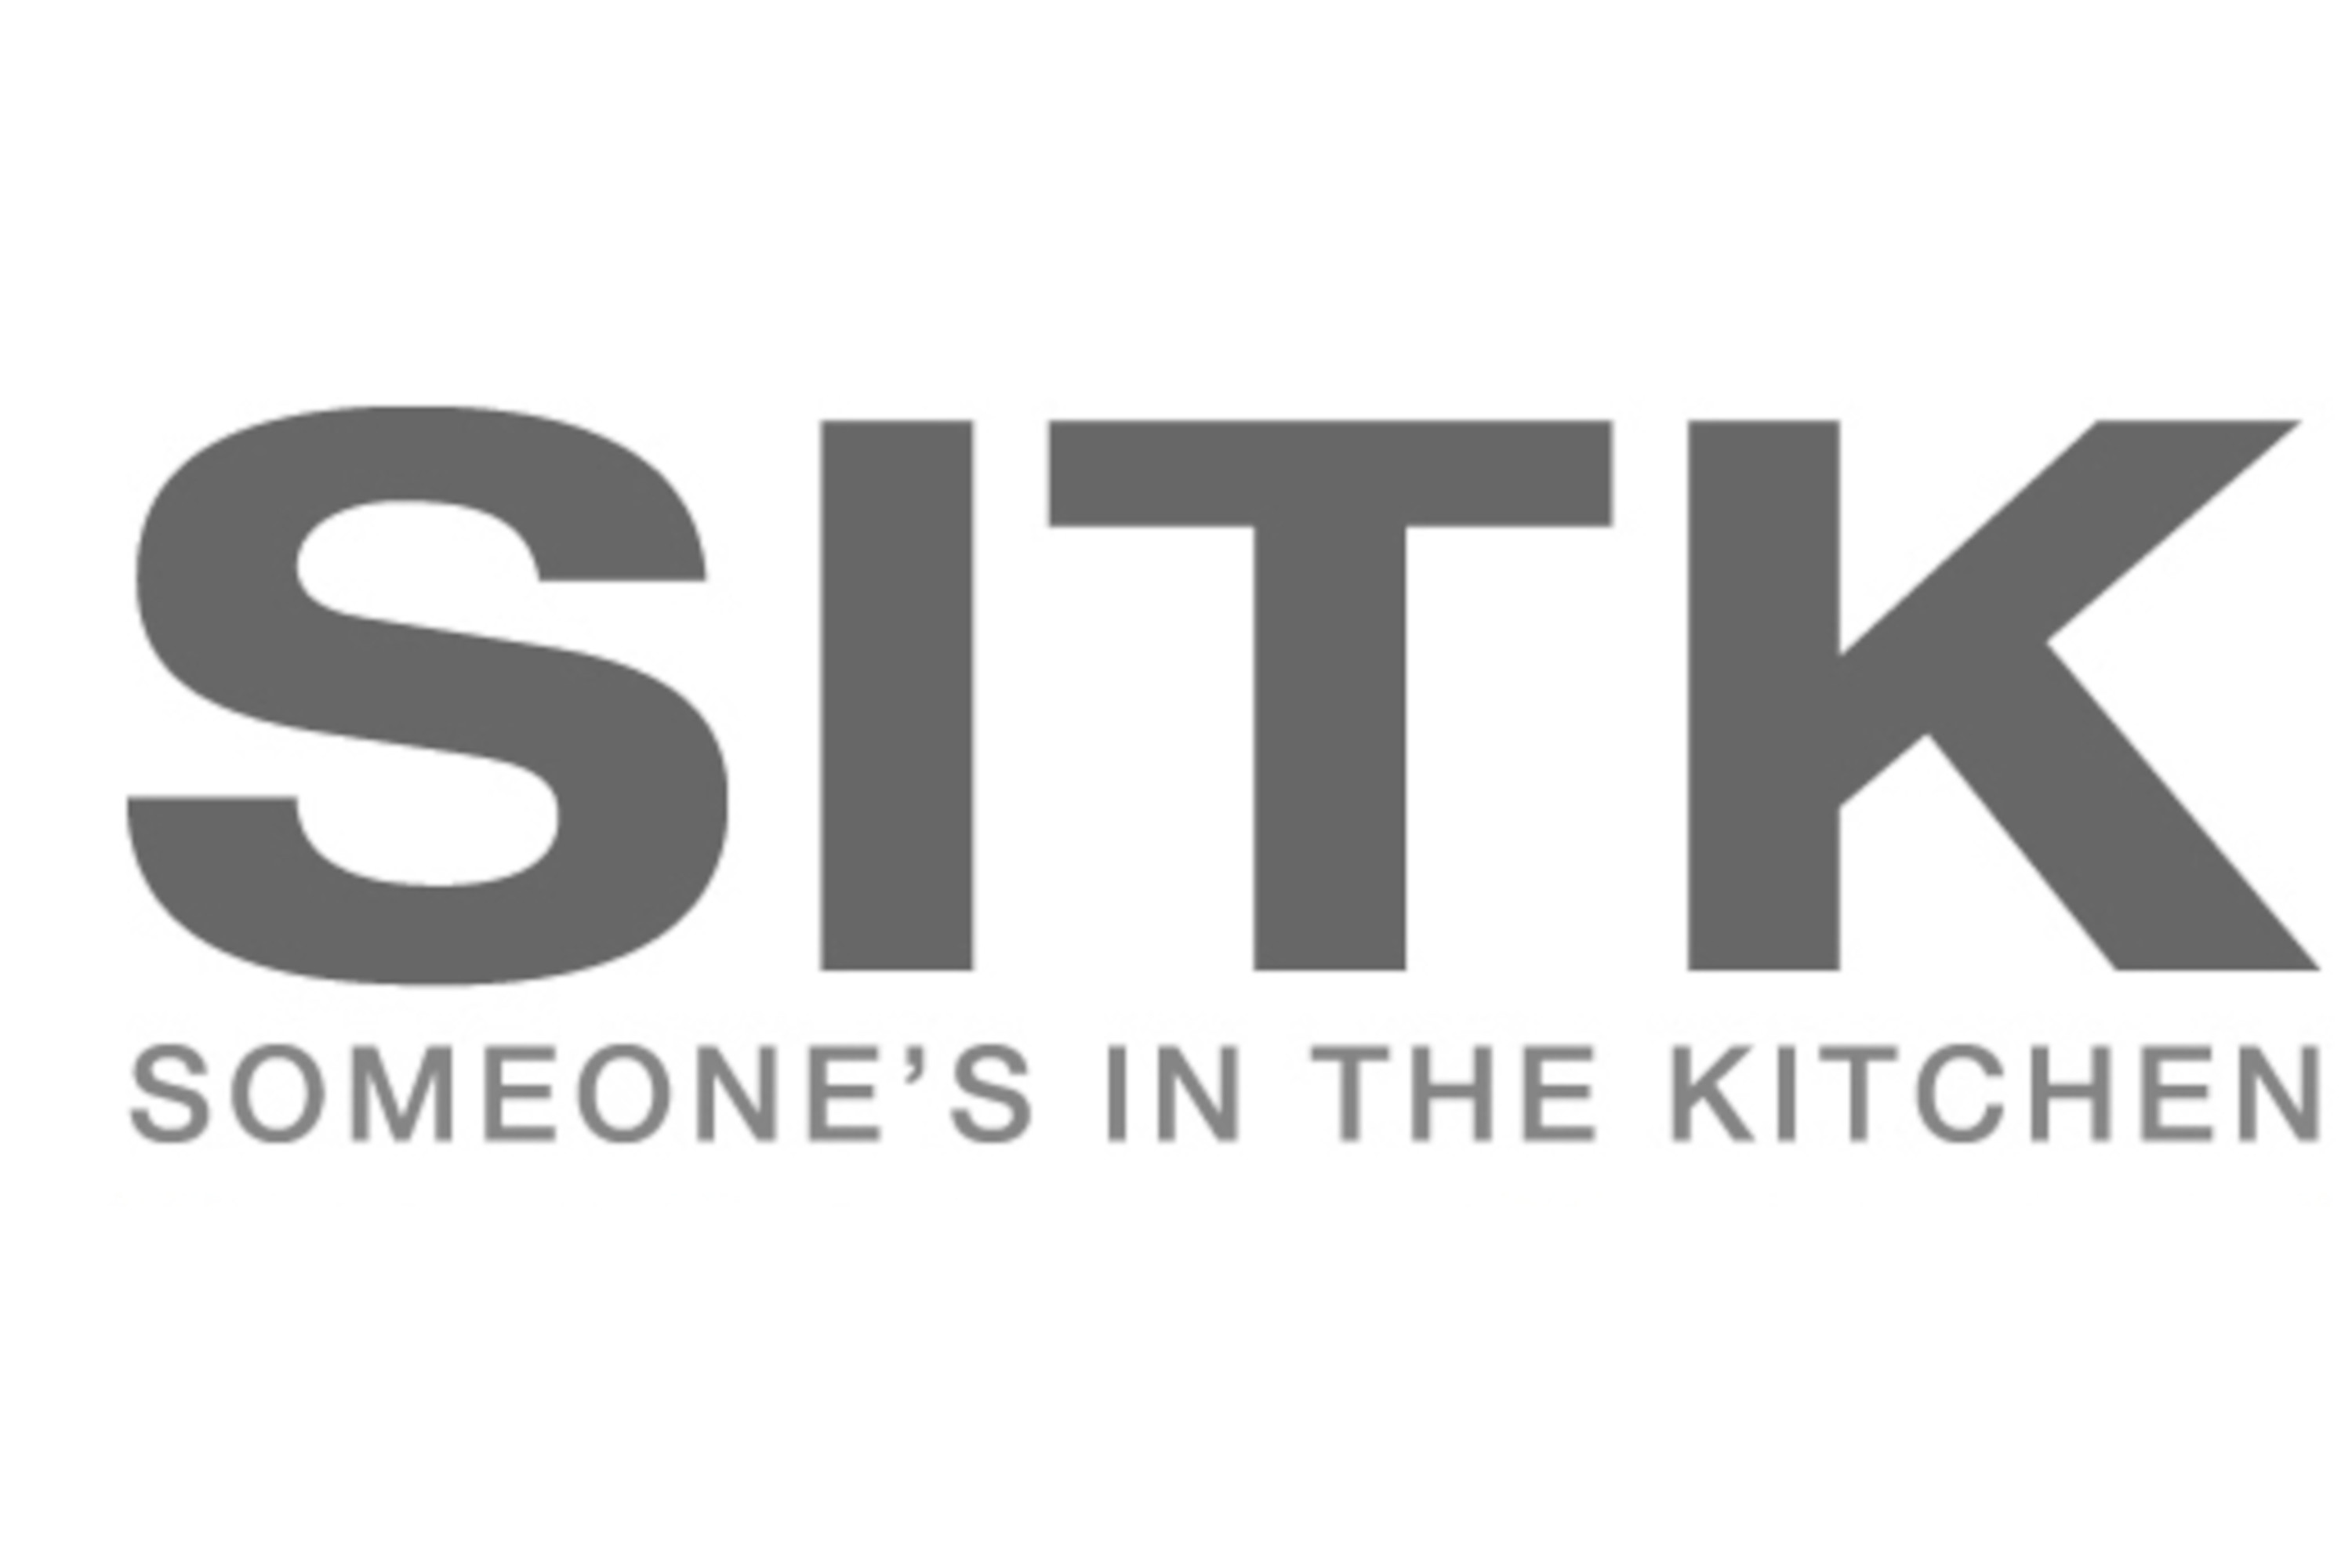 Someone's in the Kitchen Logo - Logo text in white reads "SITK" above "Someone's in the Kitchen" on grey background